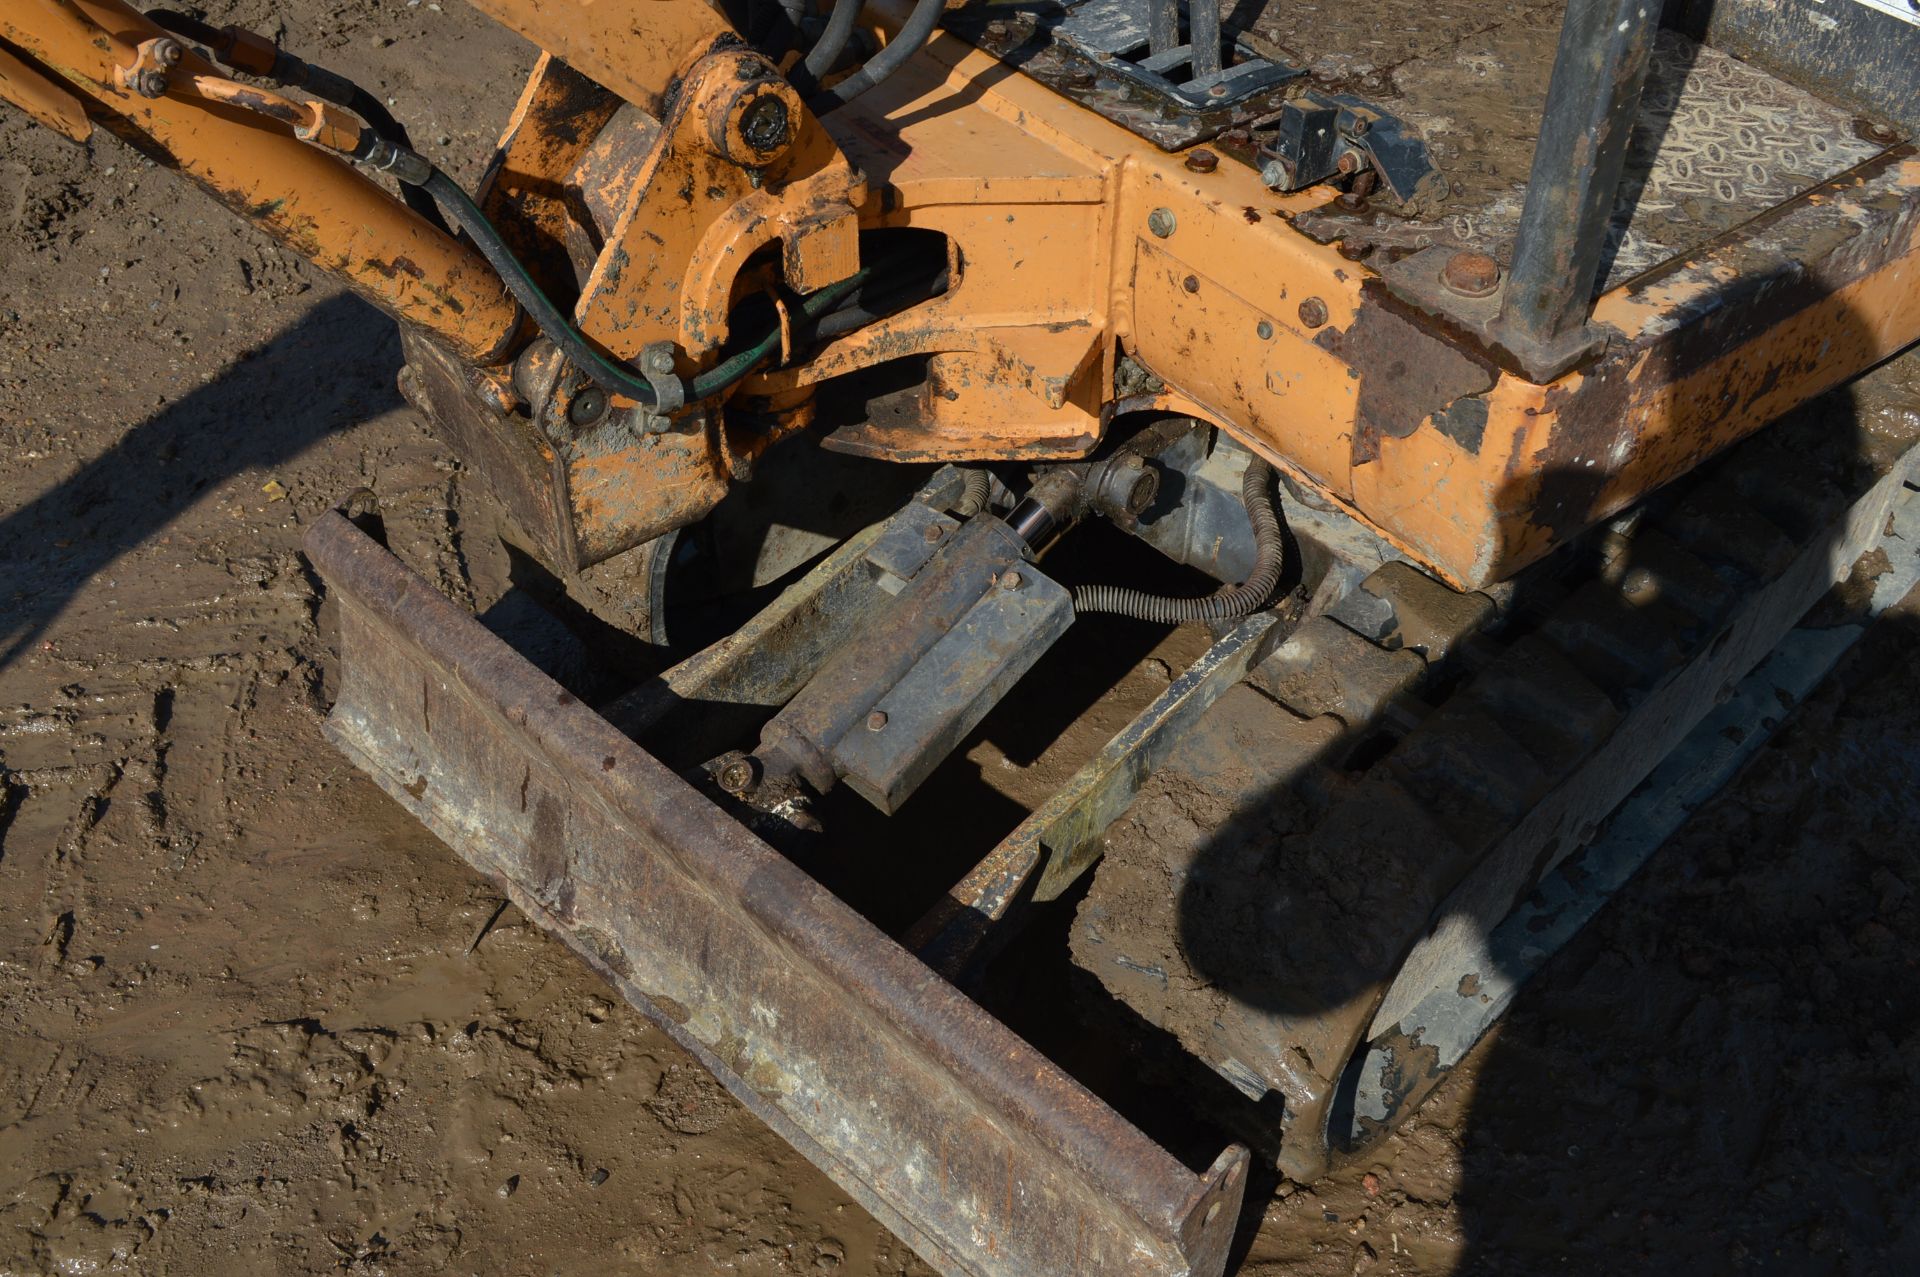 Case 1.5t Rubber Tracked Excavator with Blade - Image 25 of 26